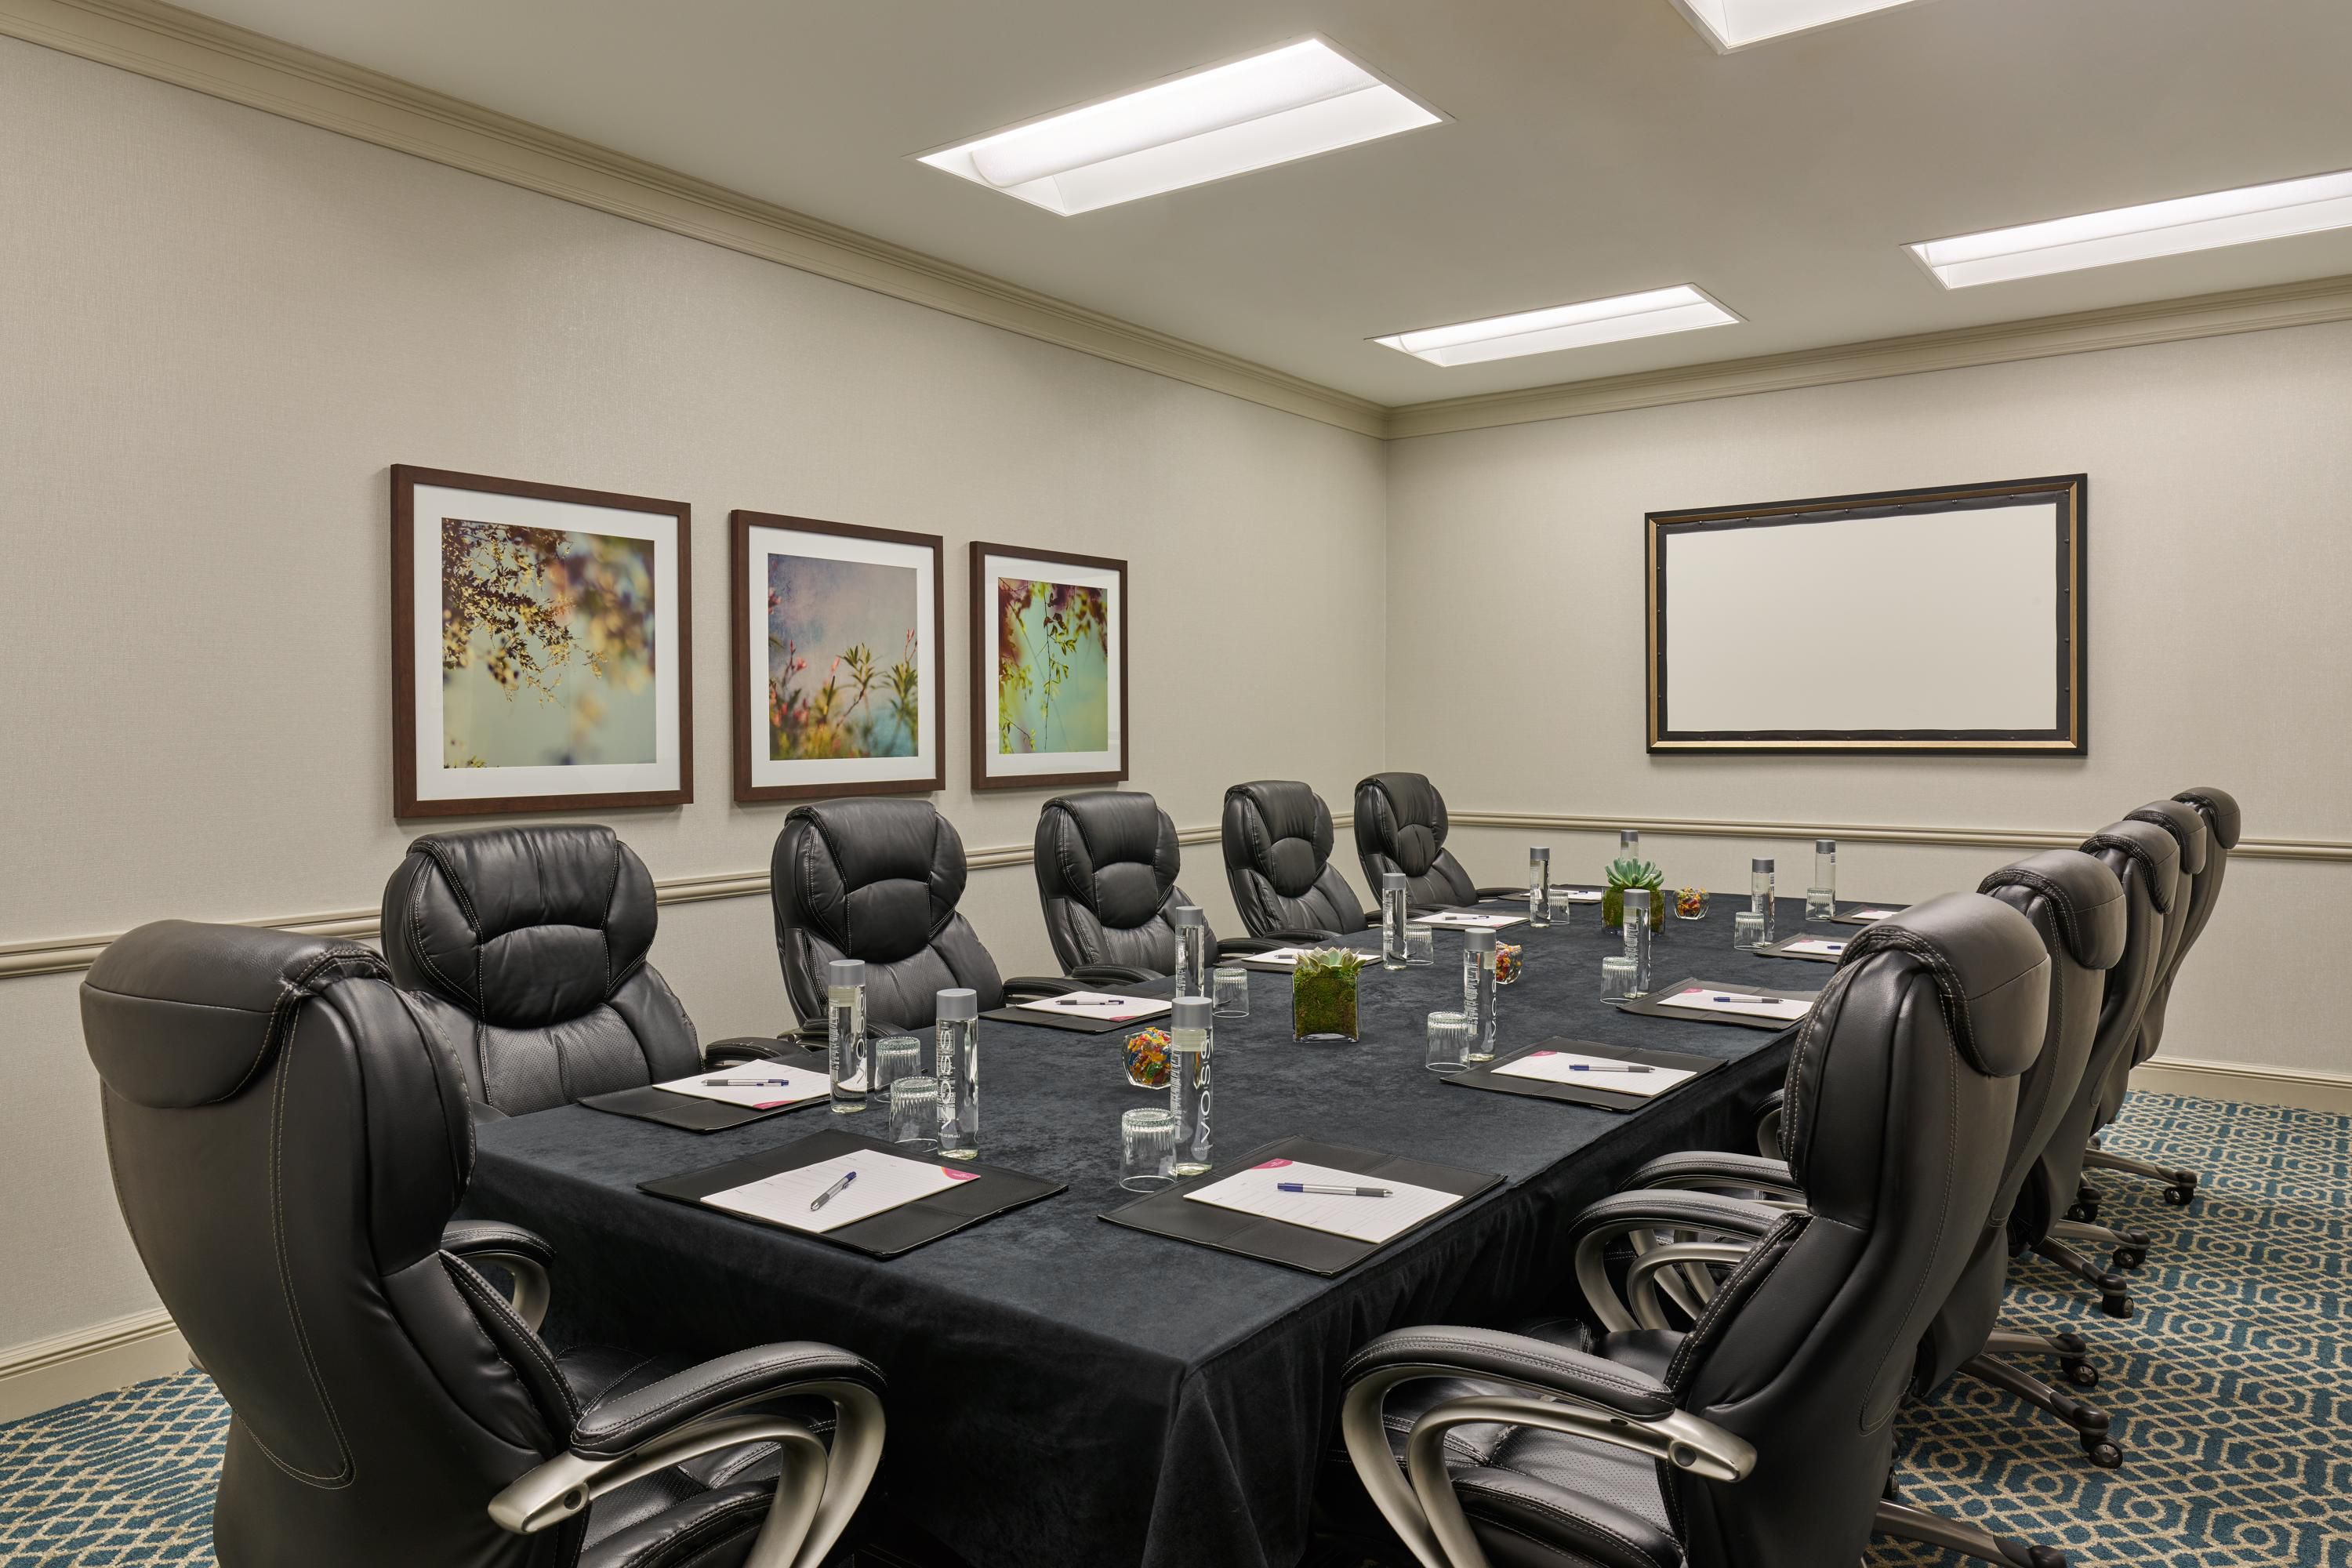 Royal Boardroom for up to 12 attendees.